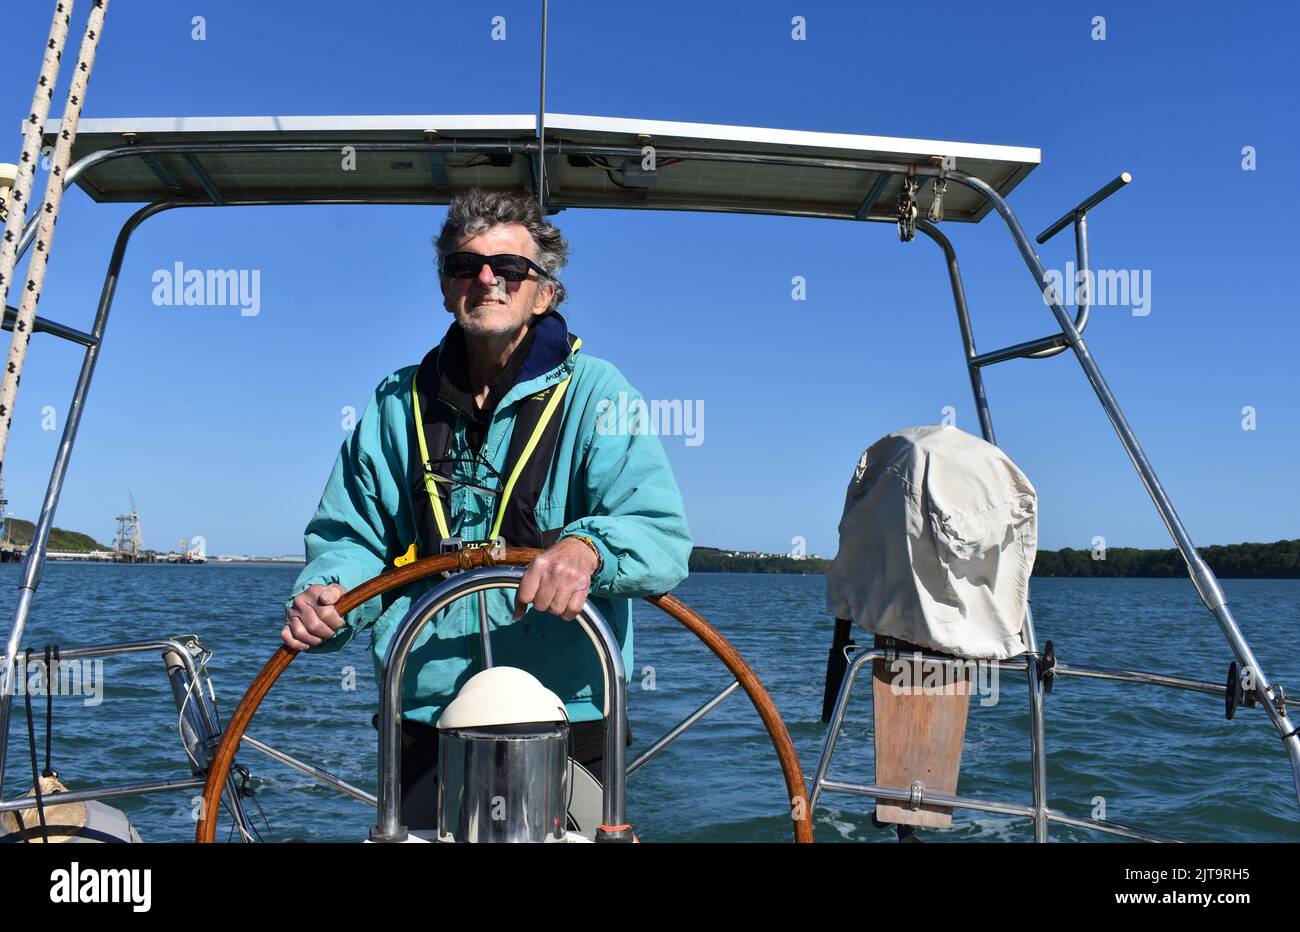 Skipper steering a yacht down the Milford Haven waterway, Pembrokeshire, Wales Stock Photo